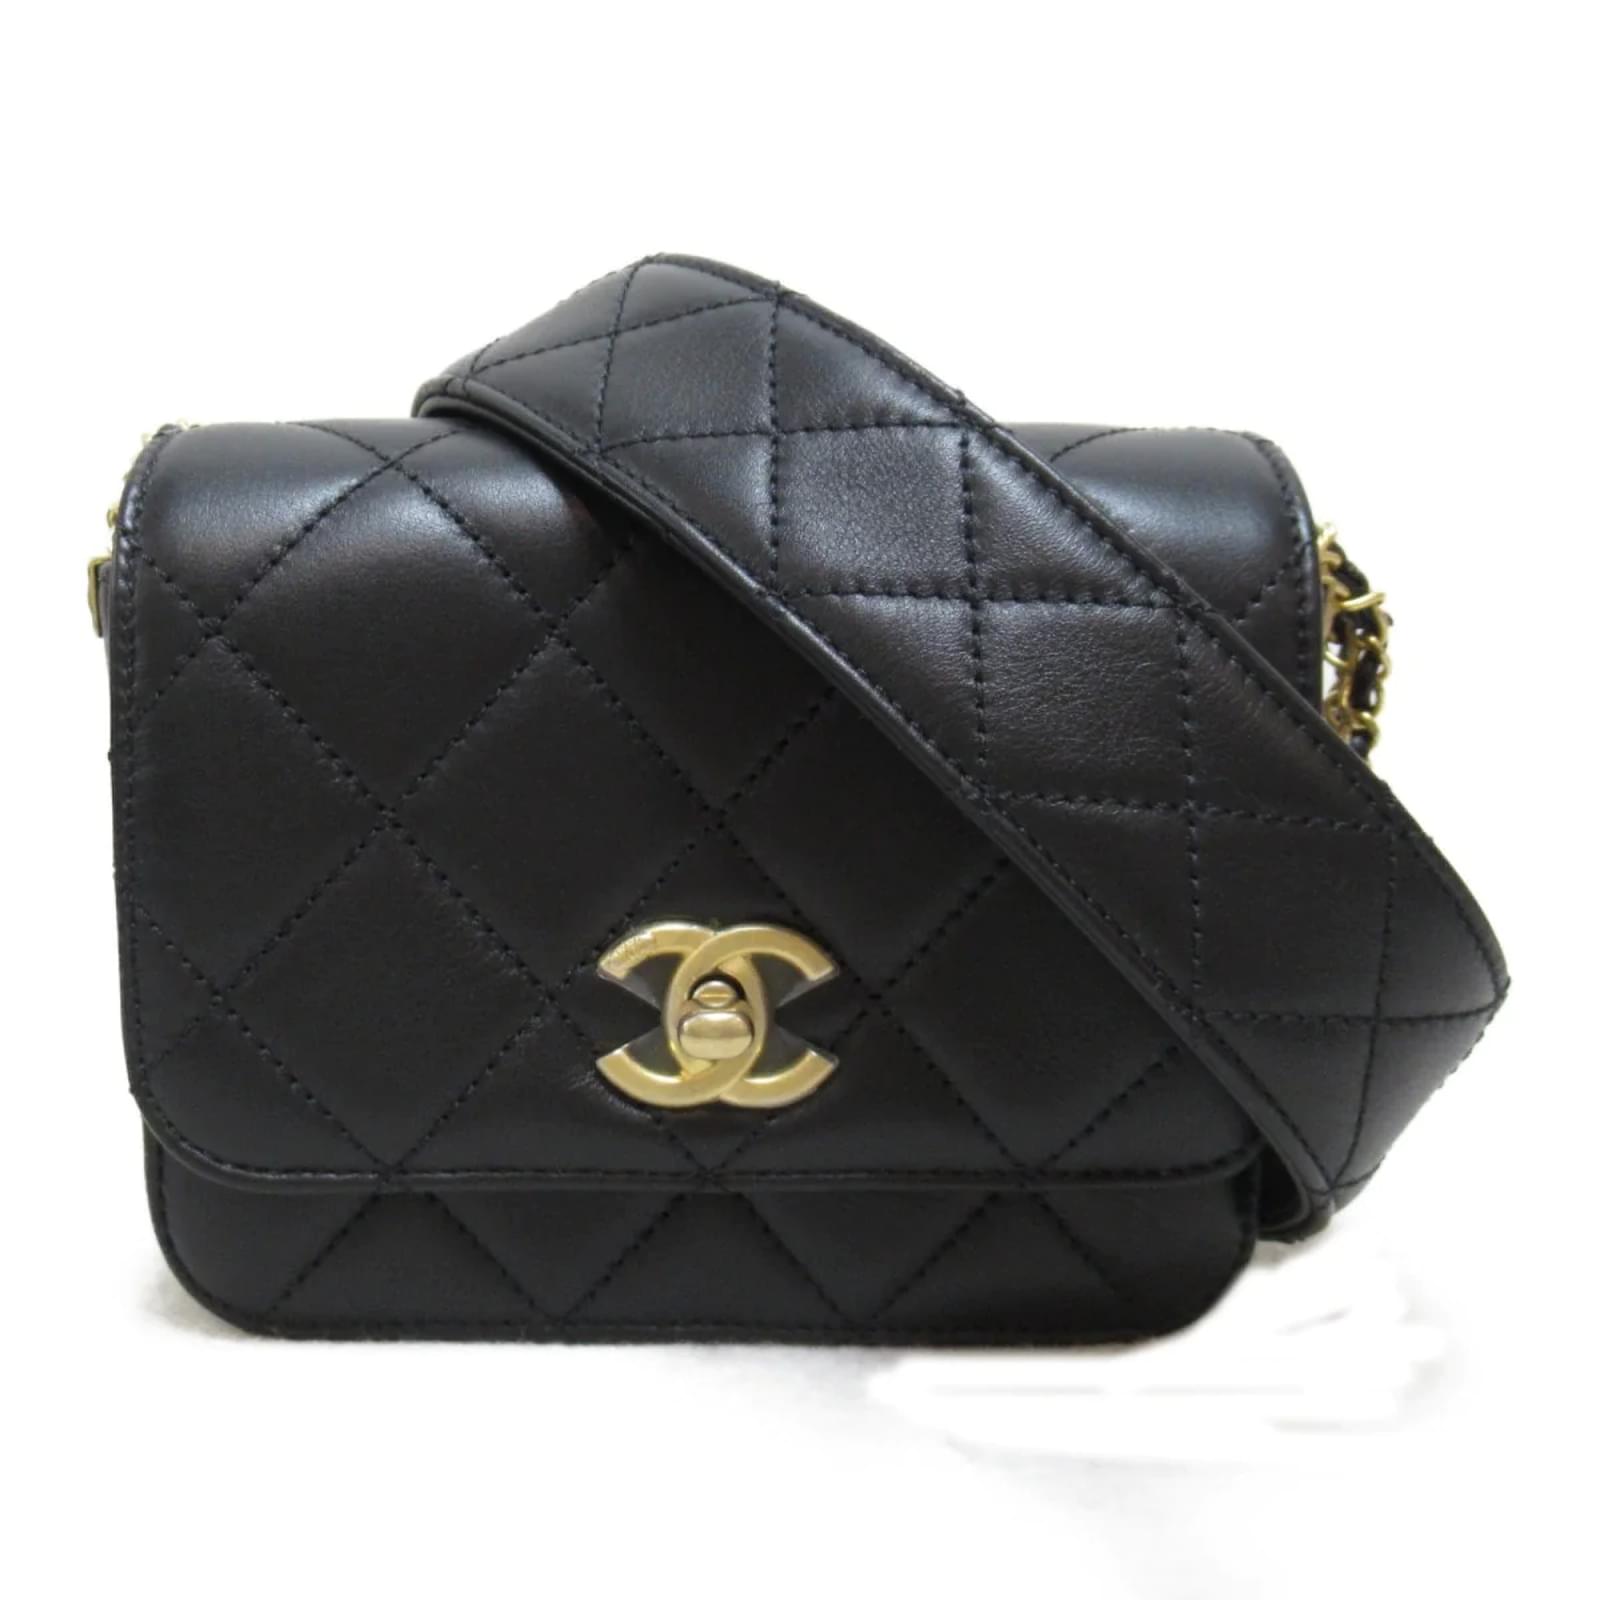 Chanel Black Quilted Leather Mini Multichain Flap Bag